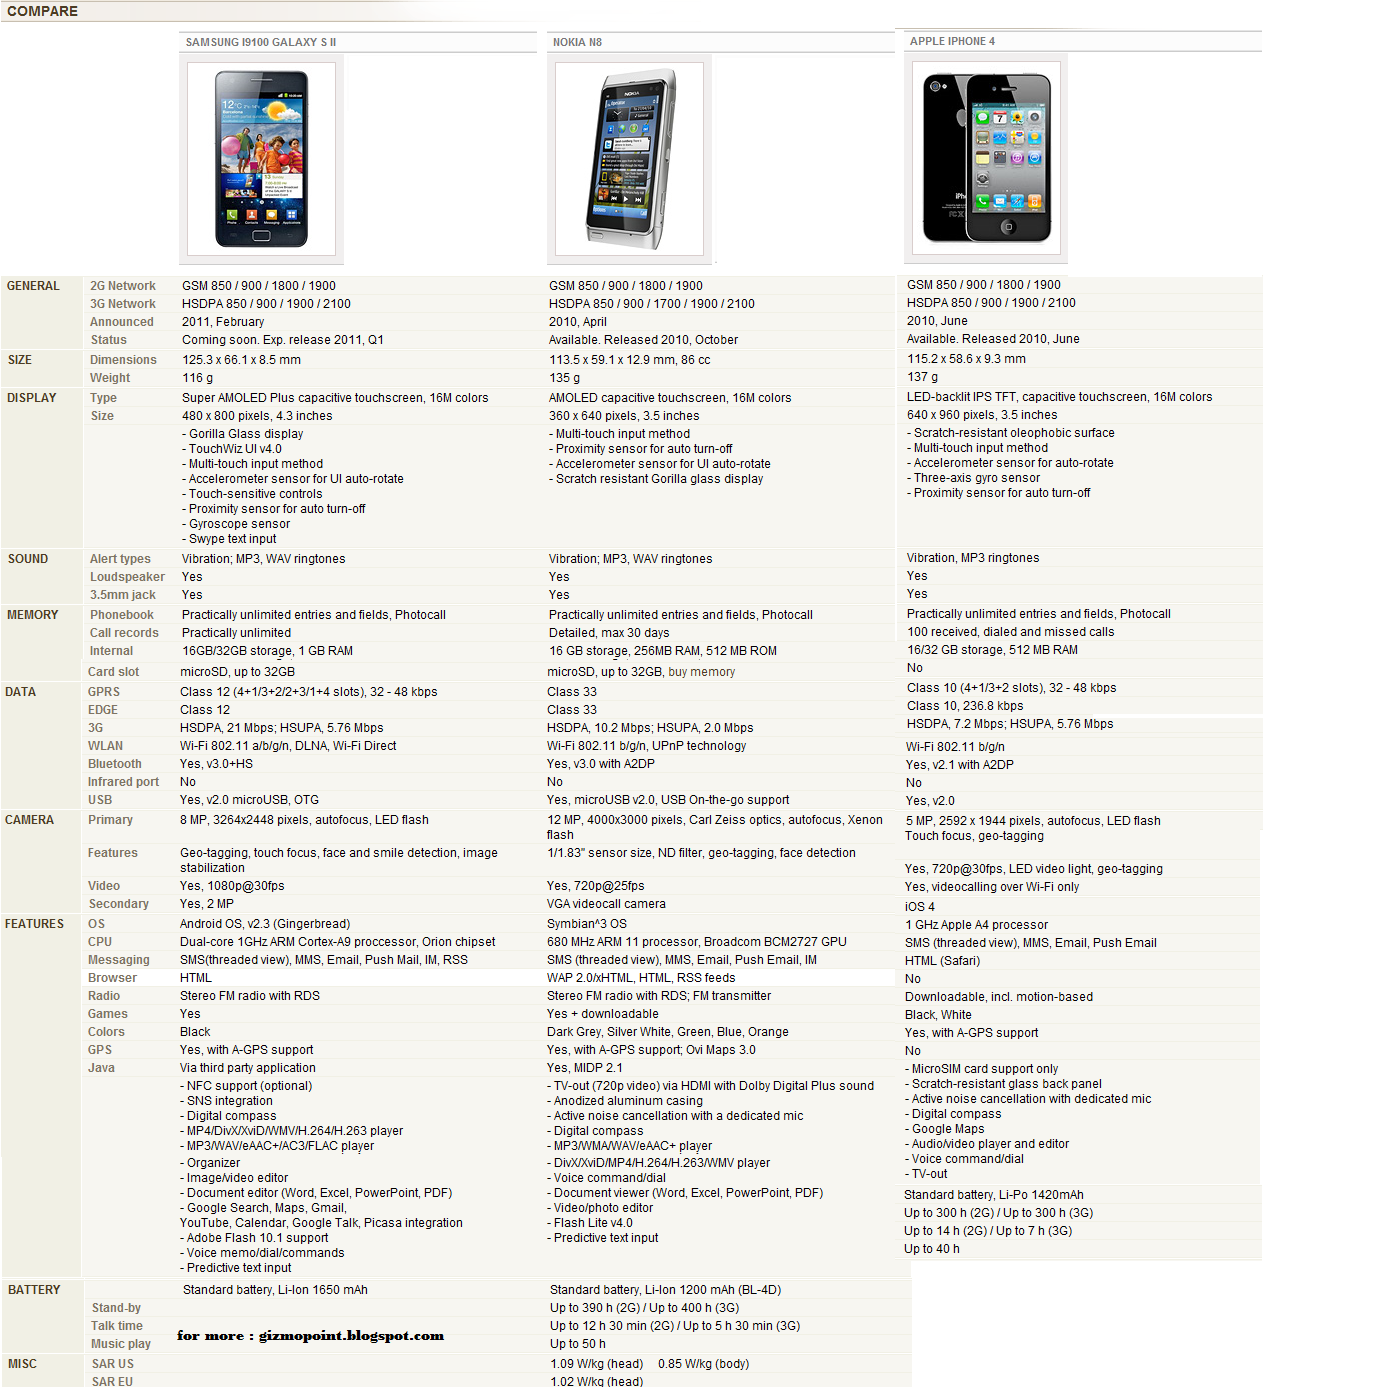 versus nokia mobile phones image search results